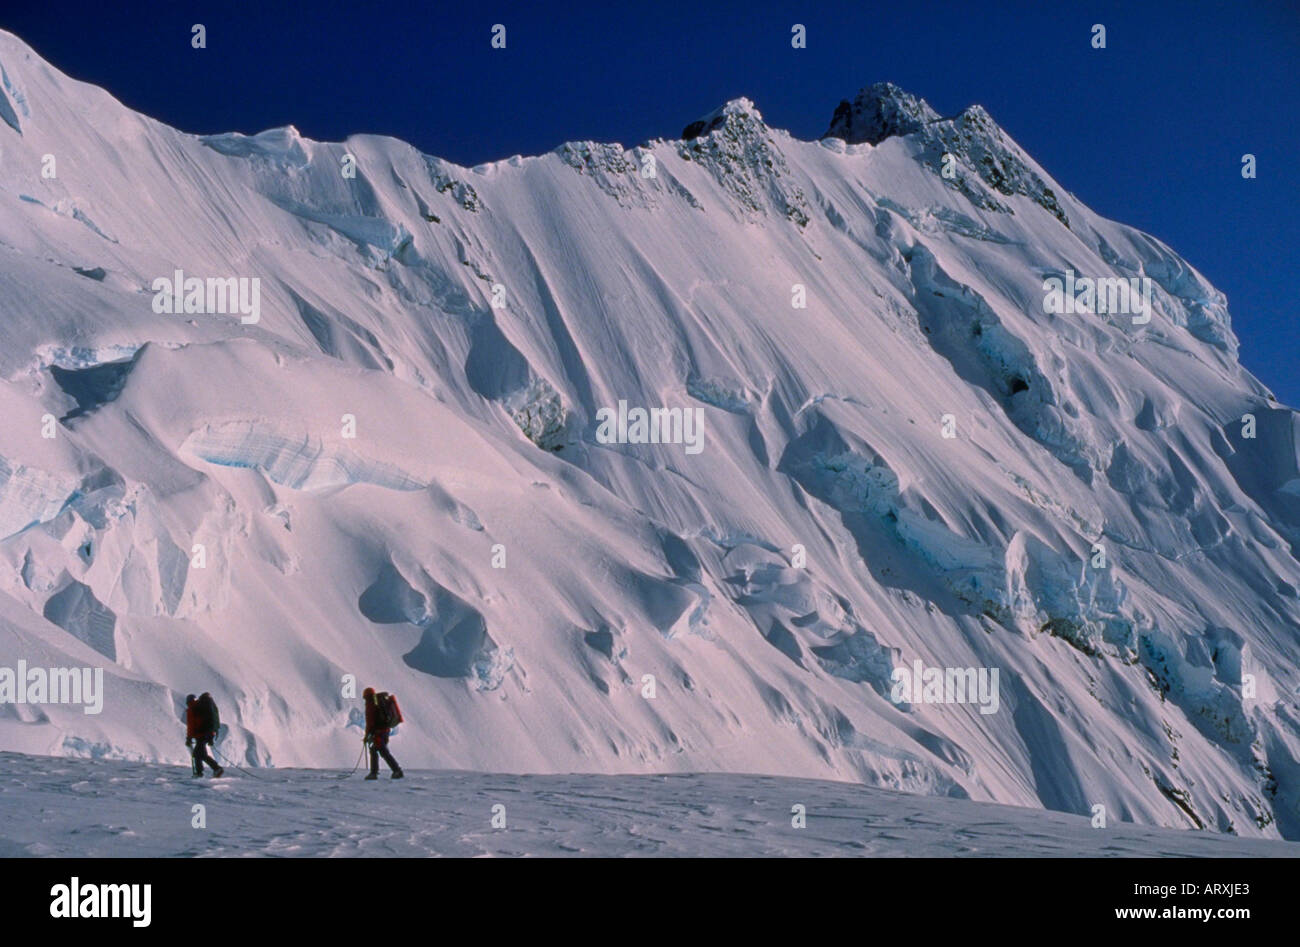 Mountaineers below the main divide of the Southern Alps in Mount Cook National Park in New Zealand Stock Photo